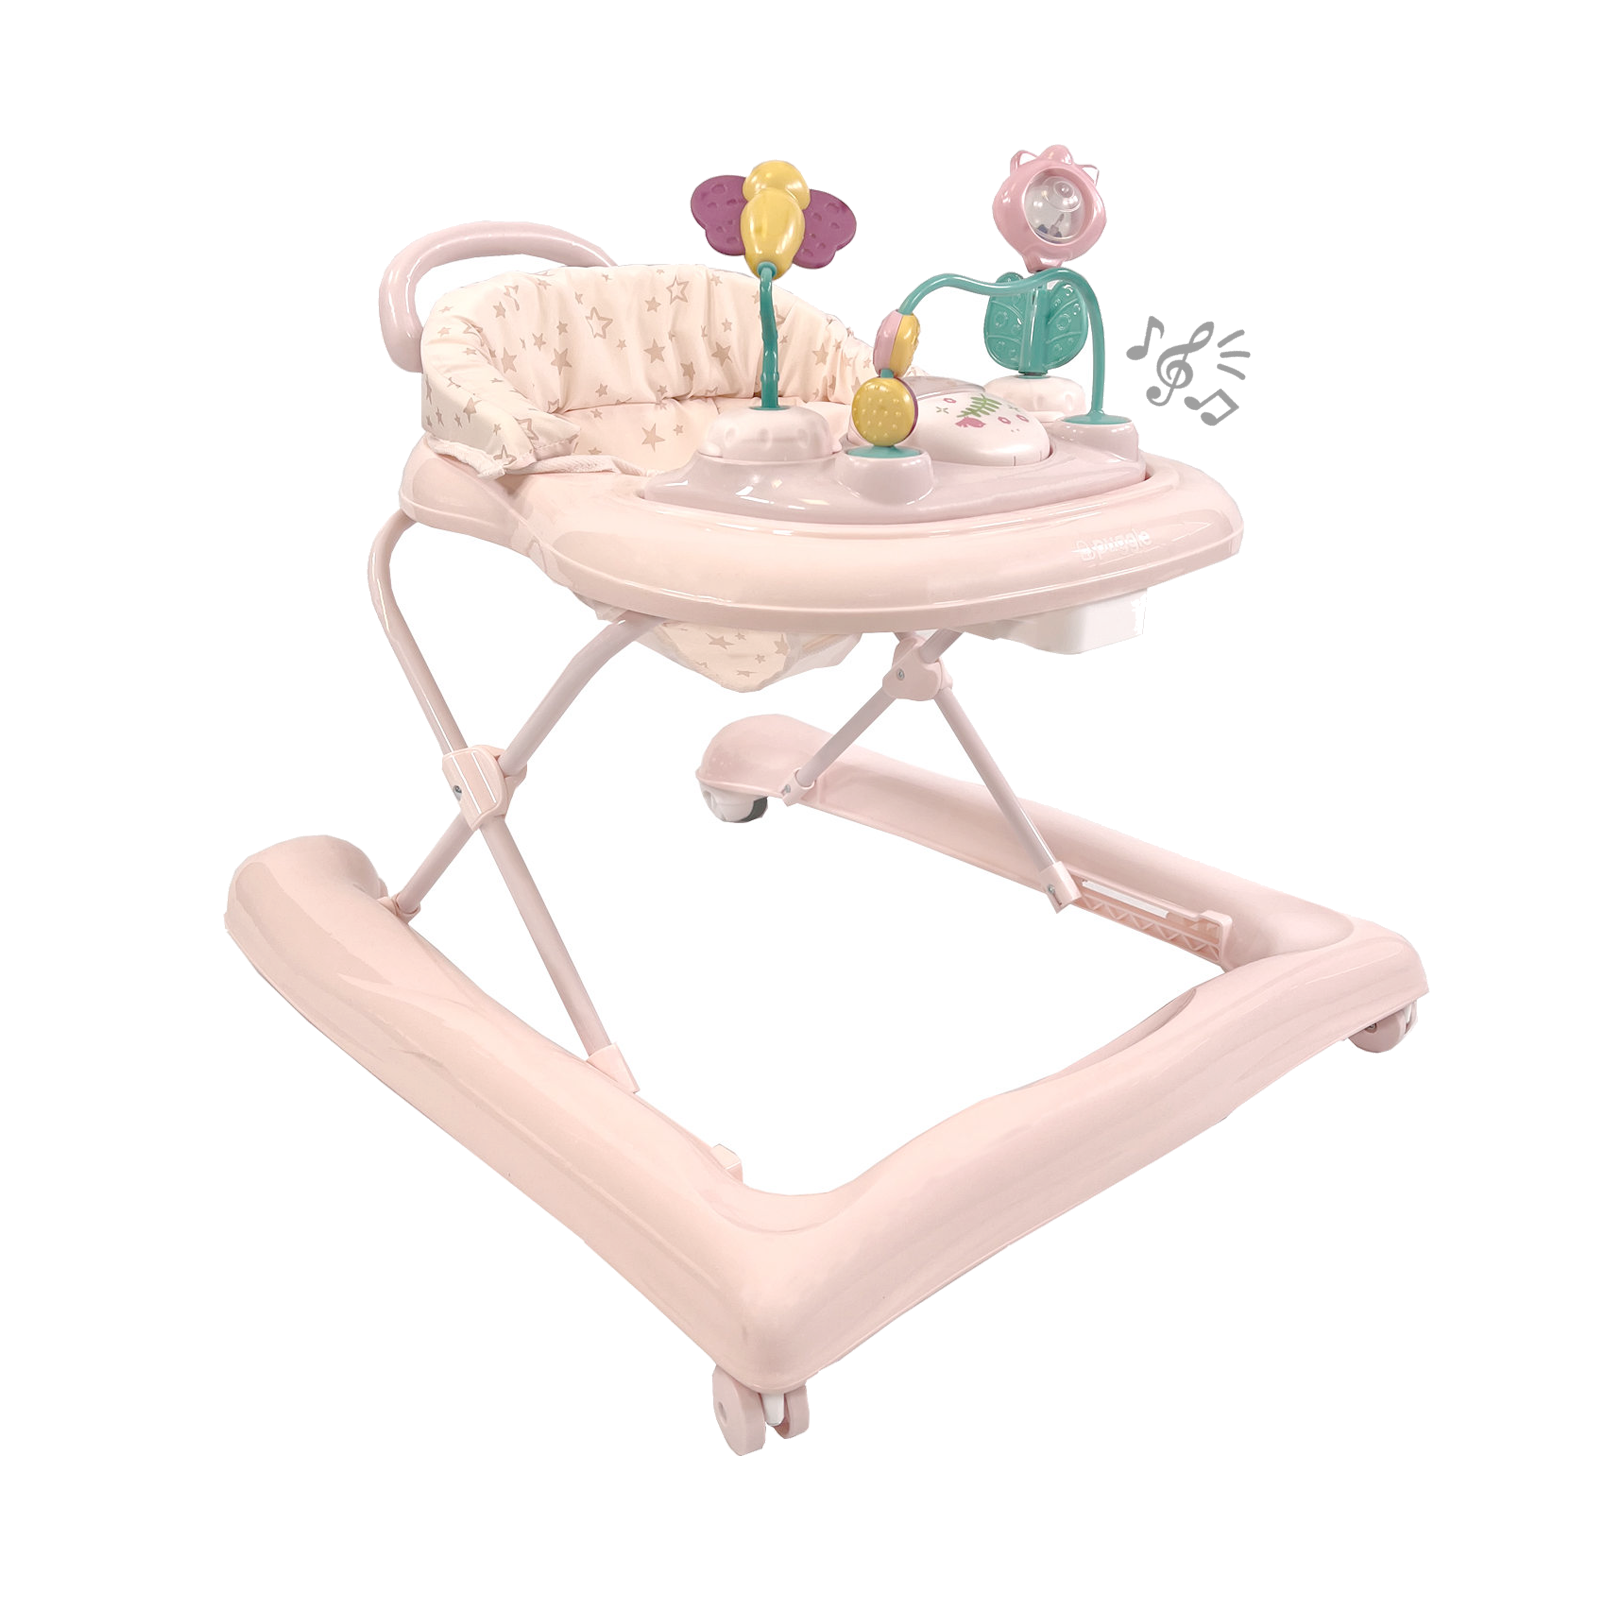 Puggle In the Garden Speedy 2 in 1 Baby Walker - Special Edition - Scattered Stars Pink